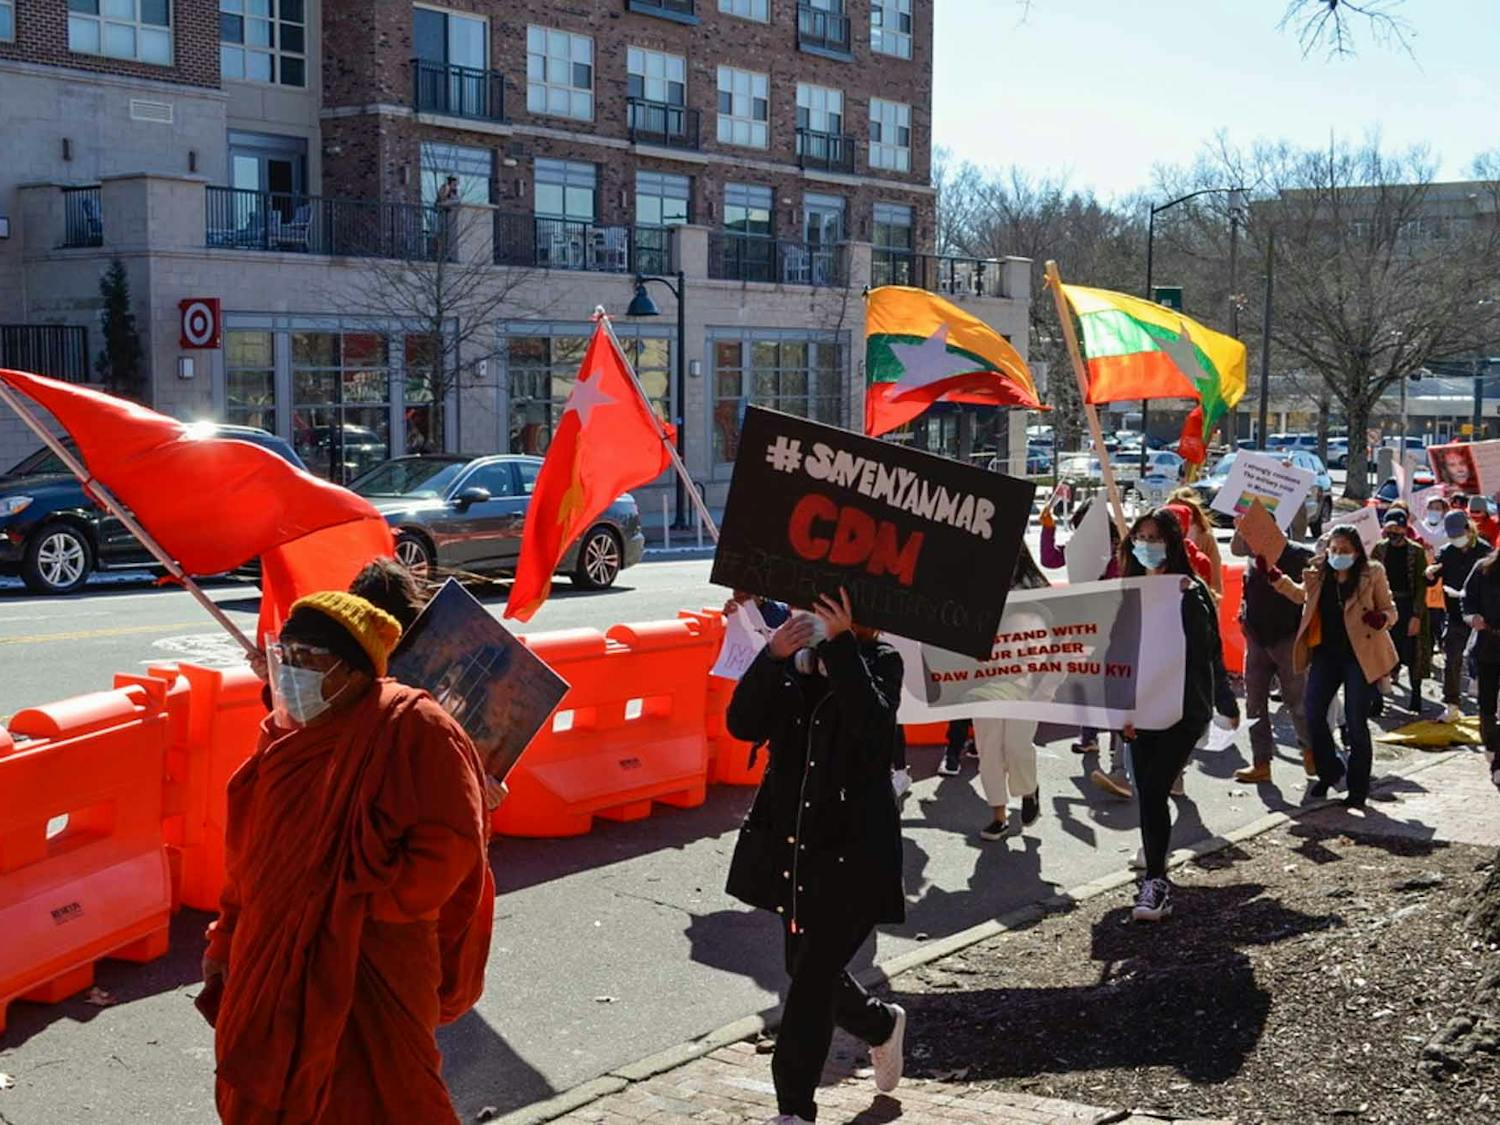 Protesters gather on Franklin Street for a demonstration against the military coup in Myanmar on Feb. 20, 2021.